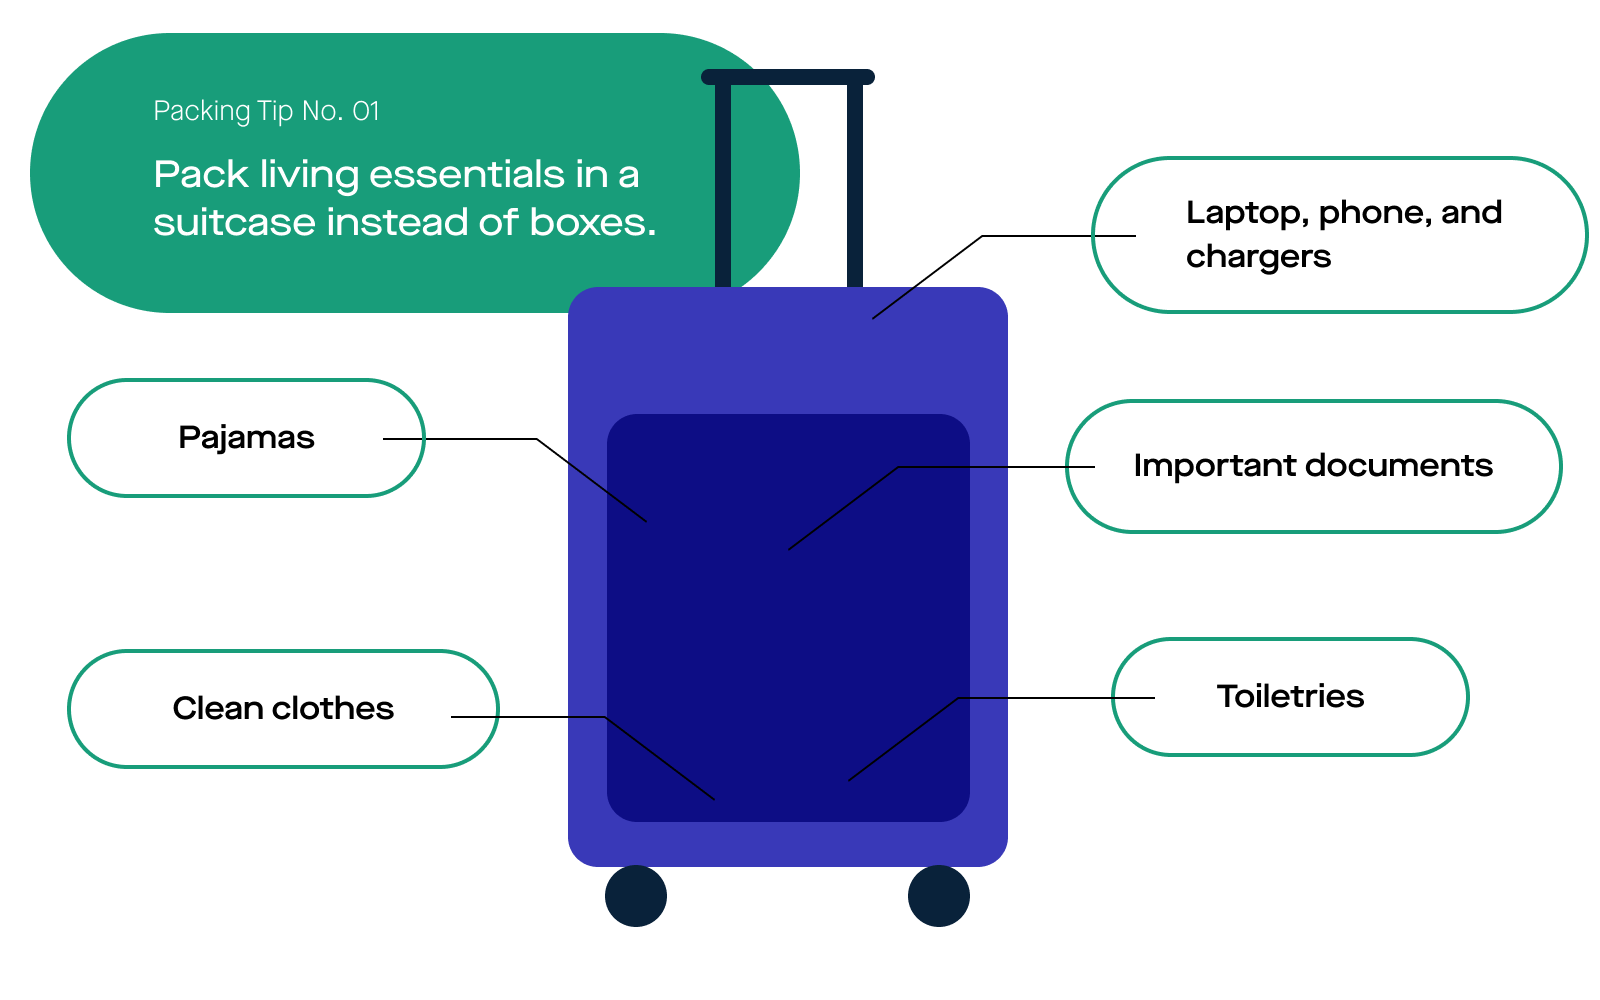 Graphic of Packing Tip No. 01 "Pack living essentials in a suitcase instead of boxes." "Laptop, phone and chargers. Pajamas. Important documents. Clean clothes. Toiletries."